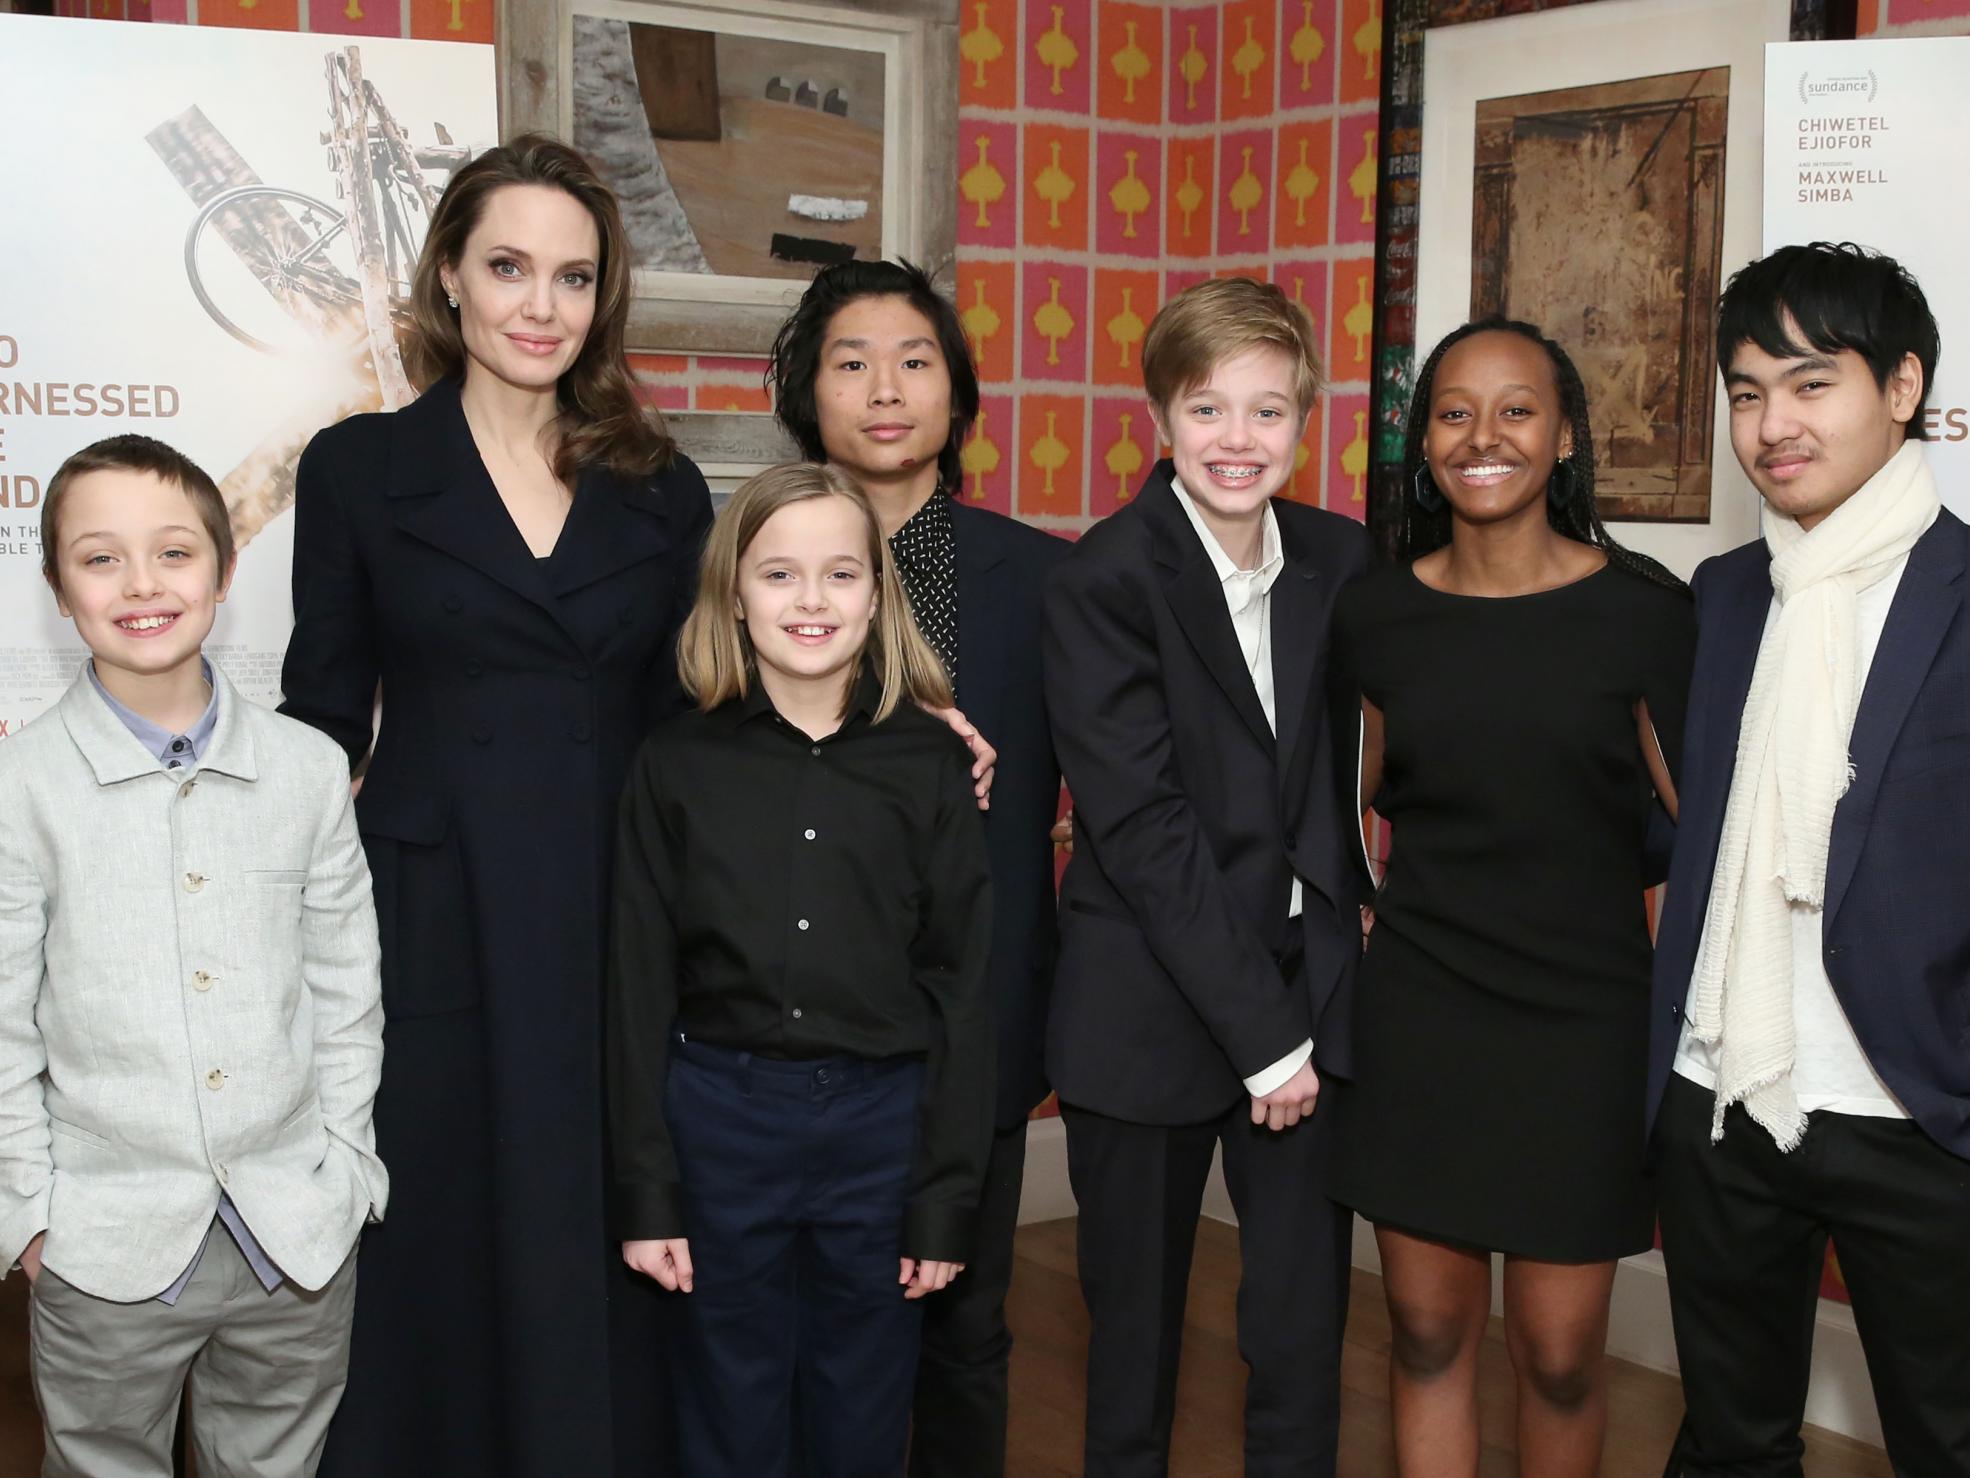 Angelina Jolie discusses her white privilege while raising a black daughter